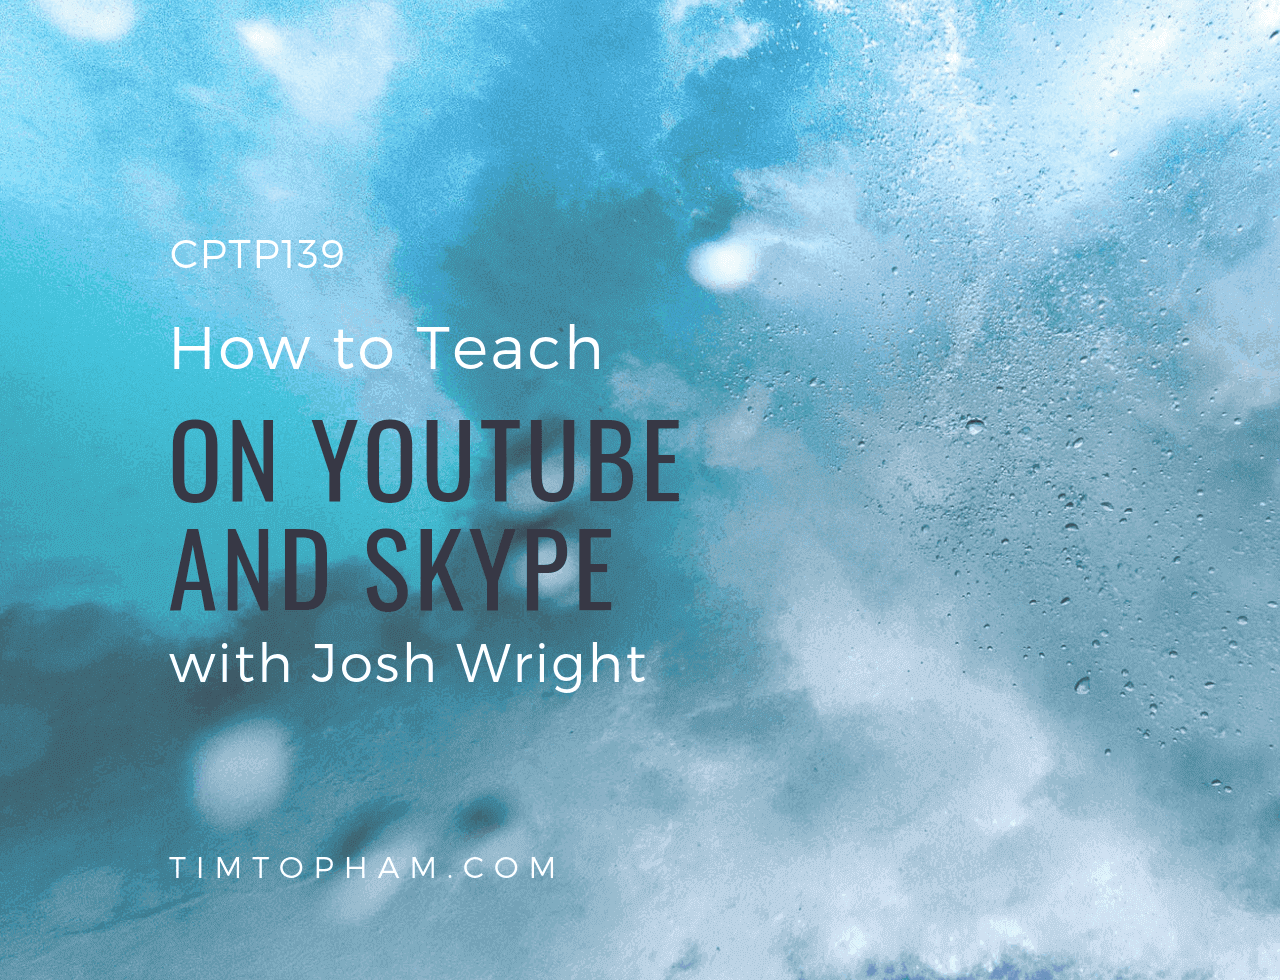 CPTP139_-How-to-Teach-on-YouTube-and-Skype-with-Josh-Wright